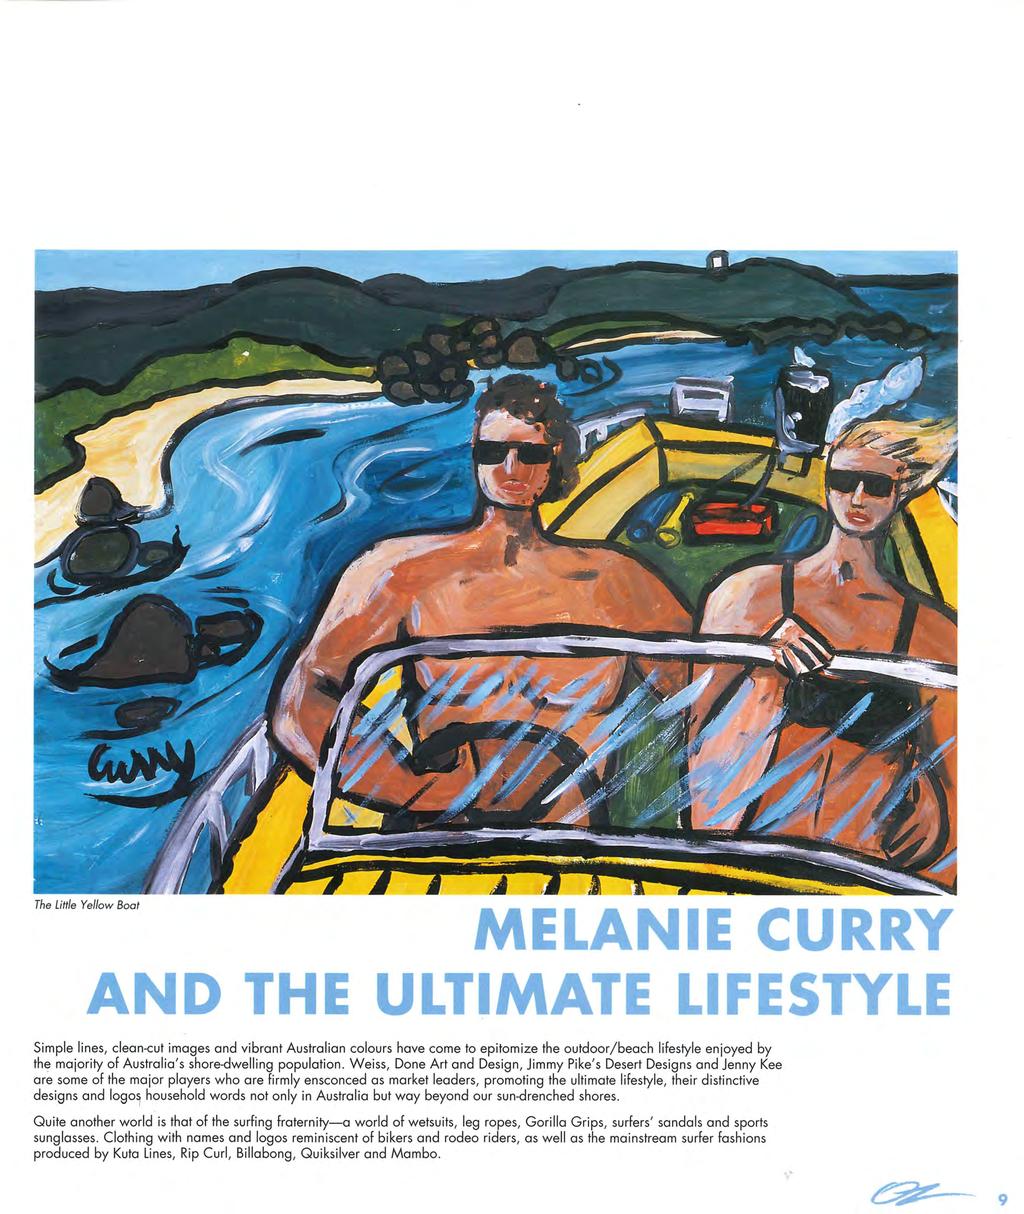 The Little Yellow Boat r~ MELANIE CURRY AND THE ULTIMATE LIFESTYLE Simple lines, clean-cut images and vibrant Australian colours have come to epitomize the outdoor /beach lifestyle enjoyed by th~